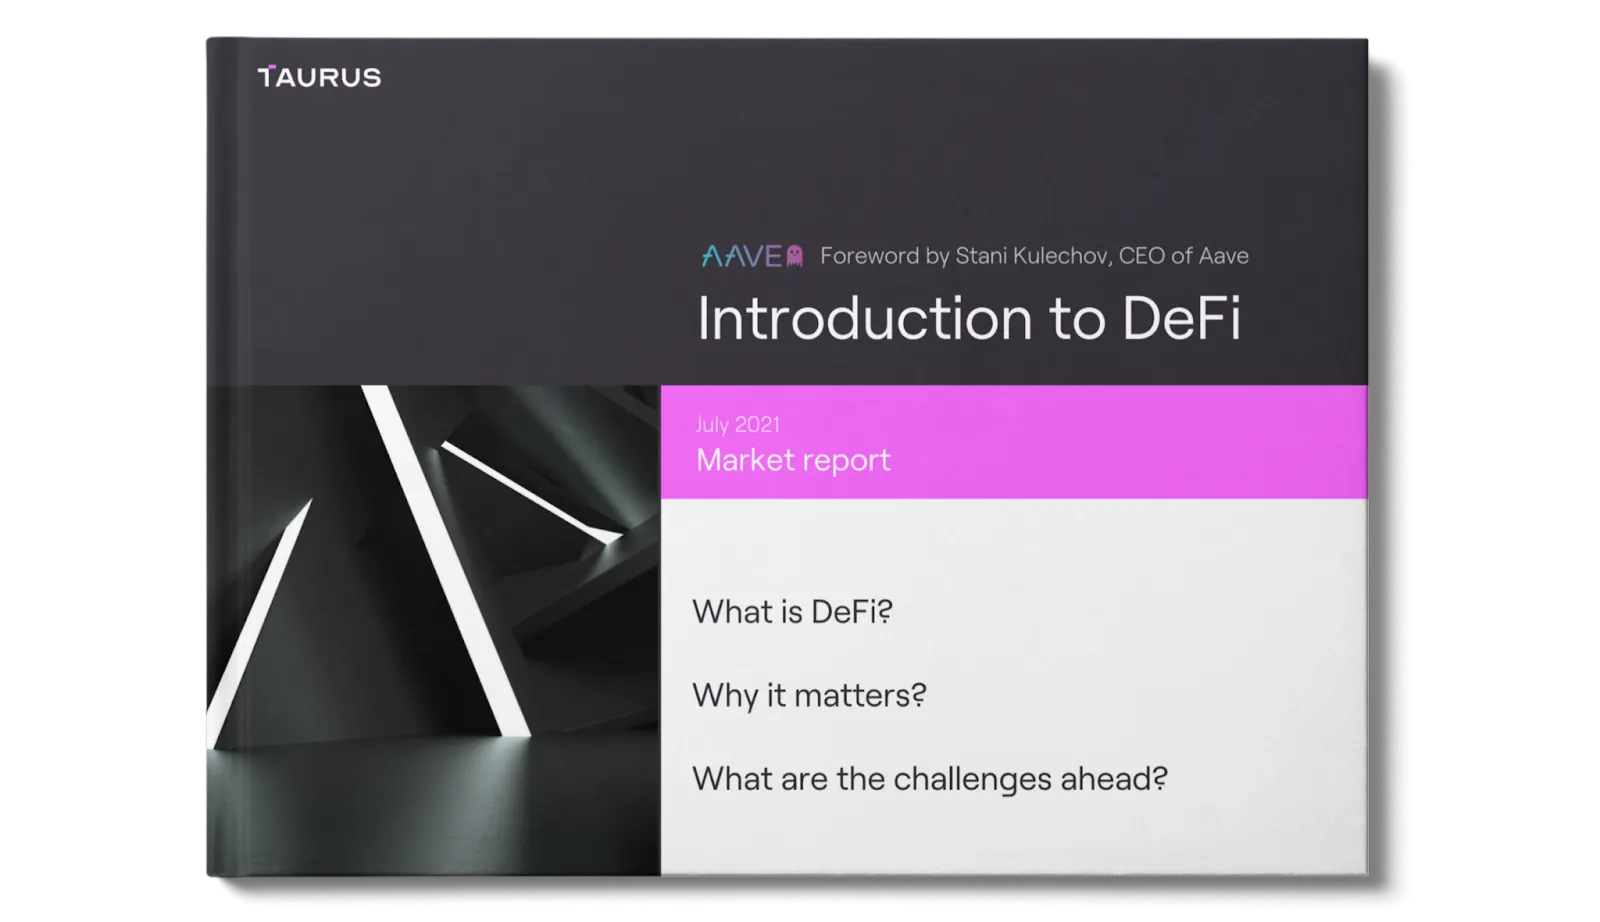 Introduction to DeFi